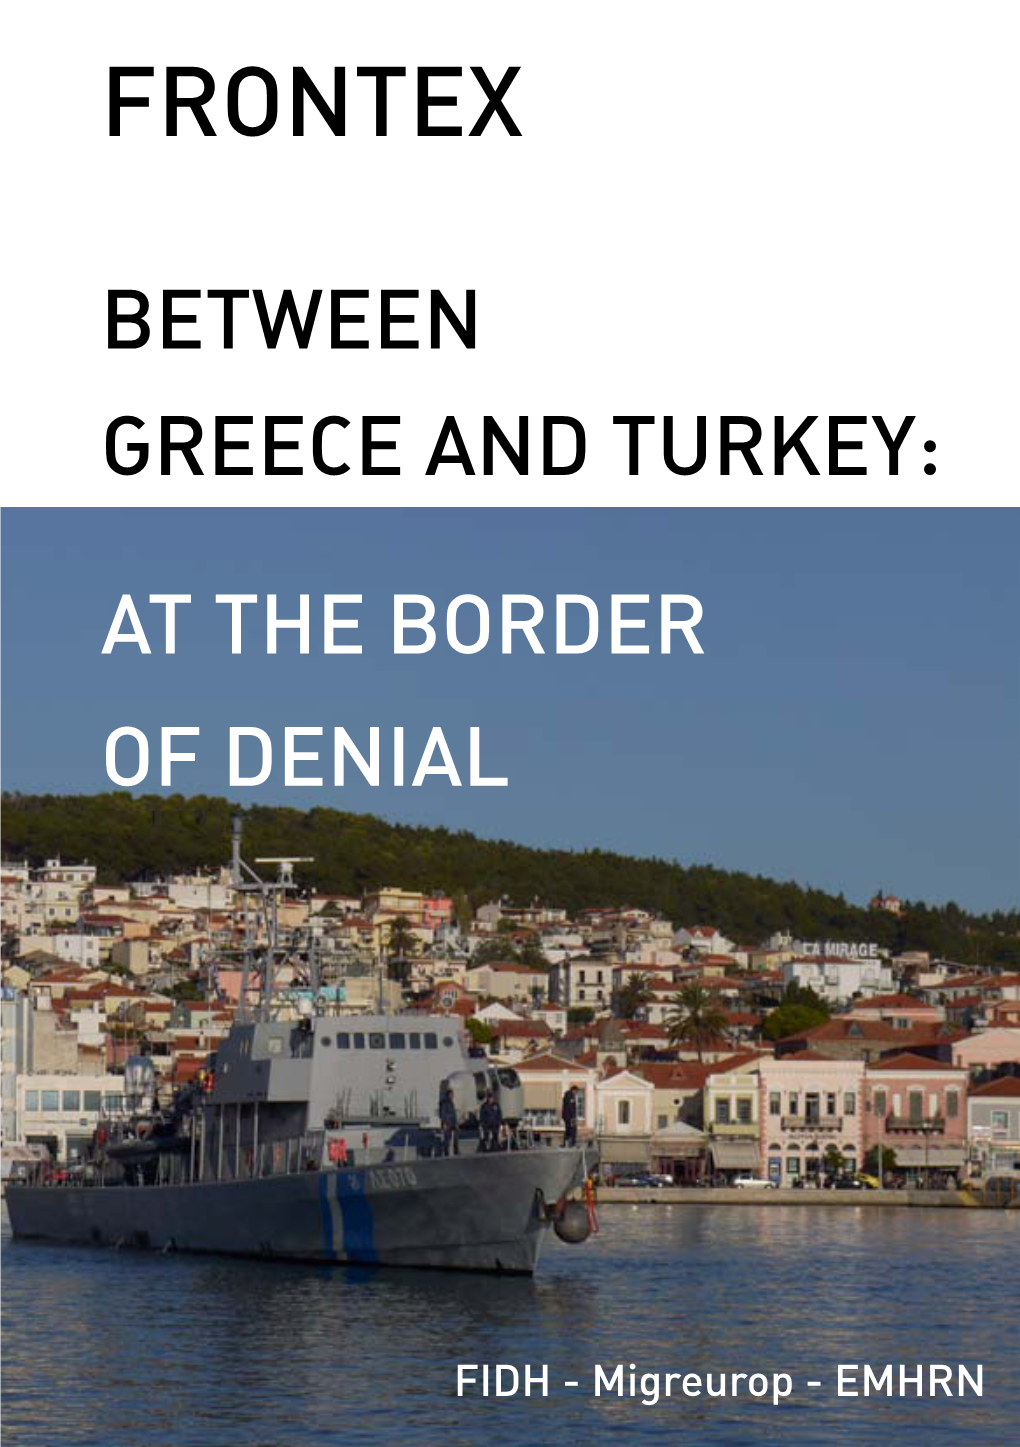 Frontex Between Greece and Turkey, at the Border of Denial